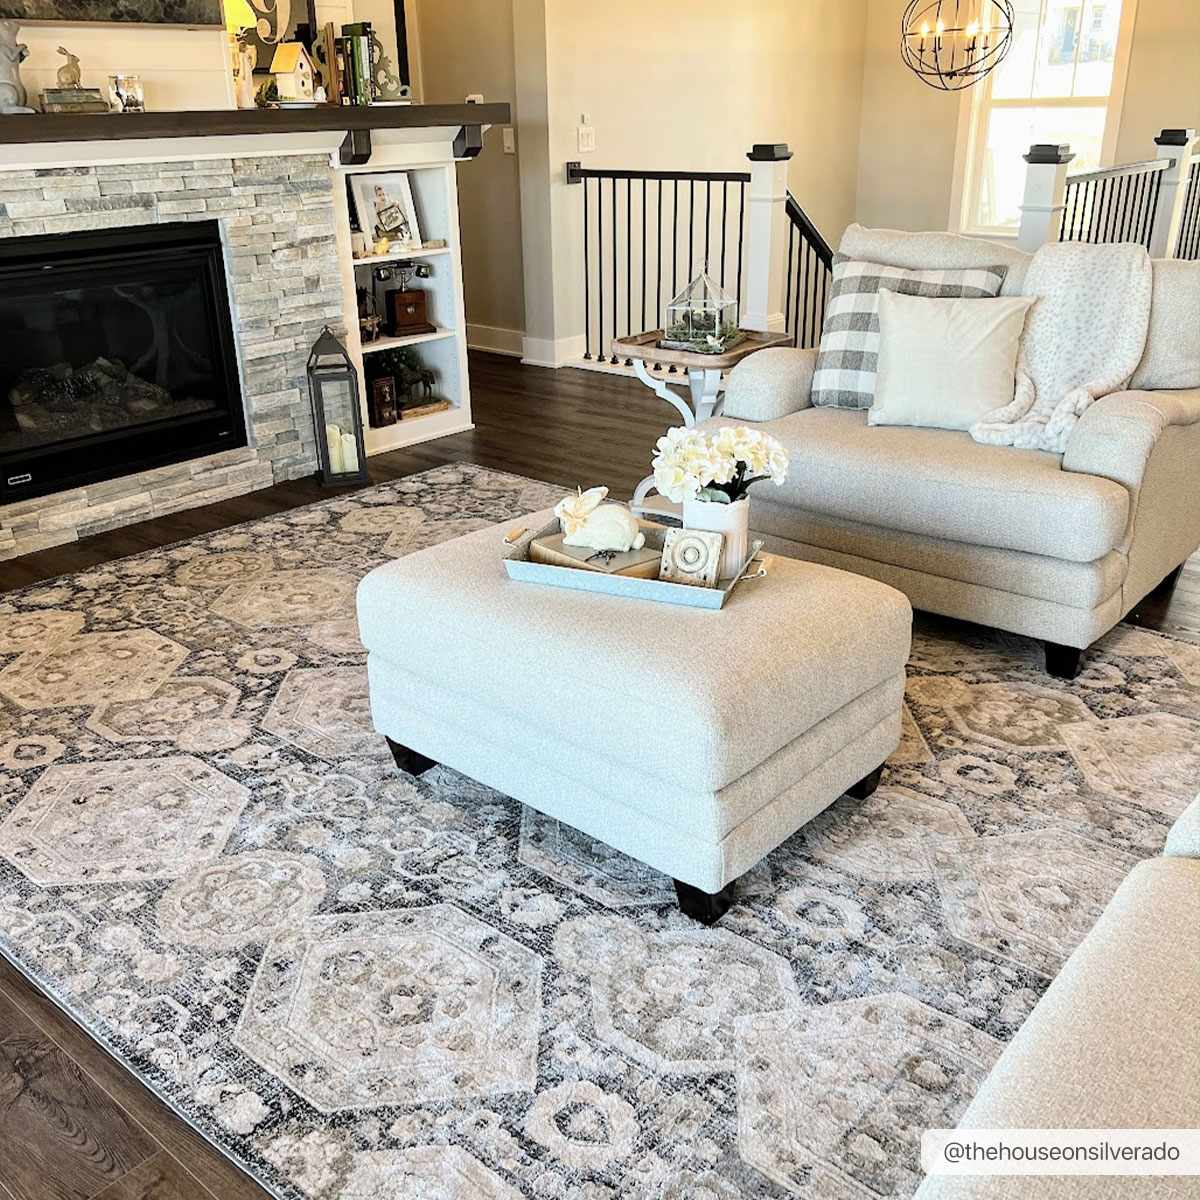 Buy Cotton Rugs in Canada at Discounted Prices